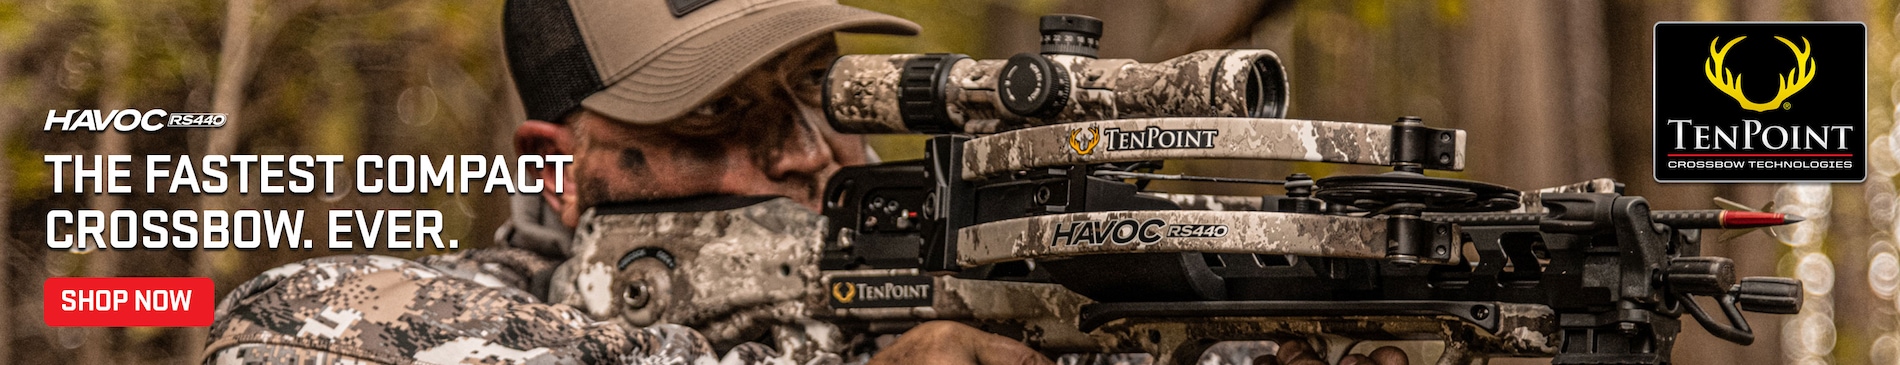 The Fastest Compact Crossbow. Ever. Shop the TenPoint Havoc RS440.